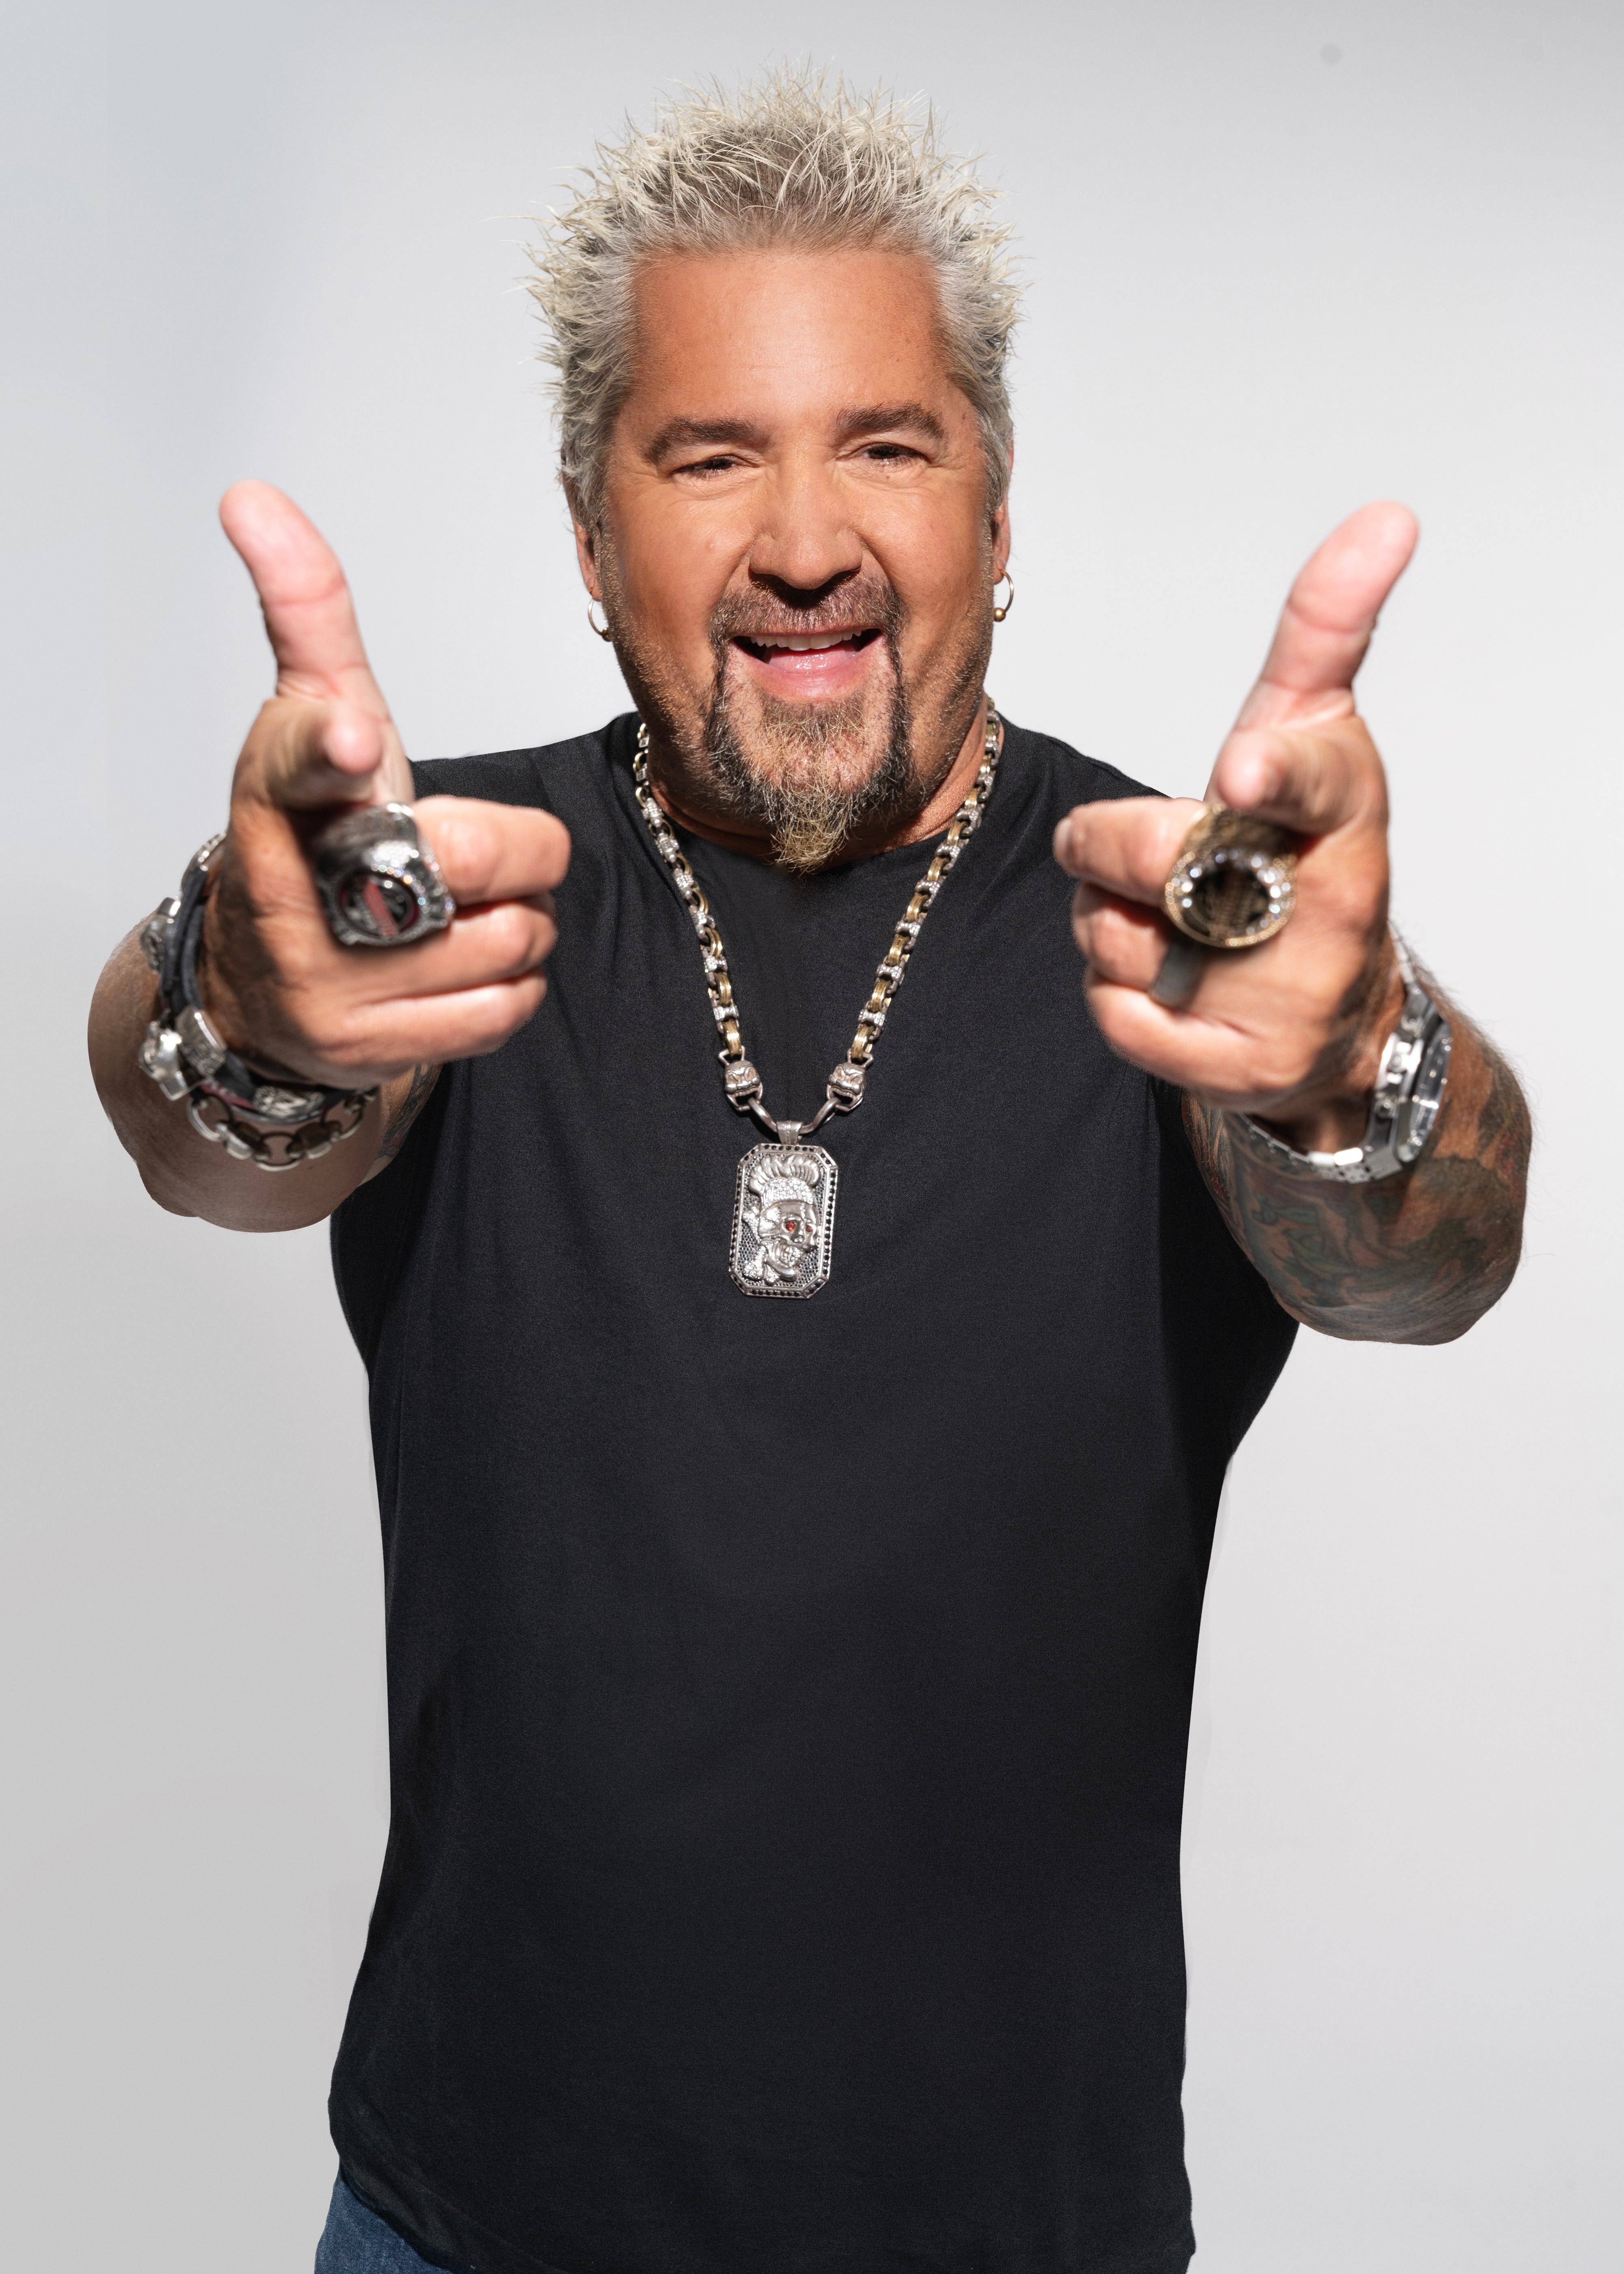 Food Network star and chef Guy Fieri was born in Columbus, Ohio, and chose the city for his inaugural Flavortown Fest.